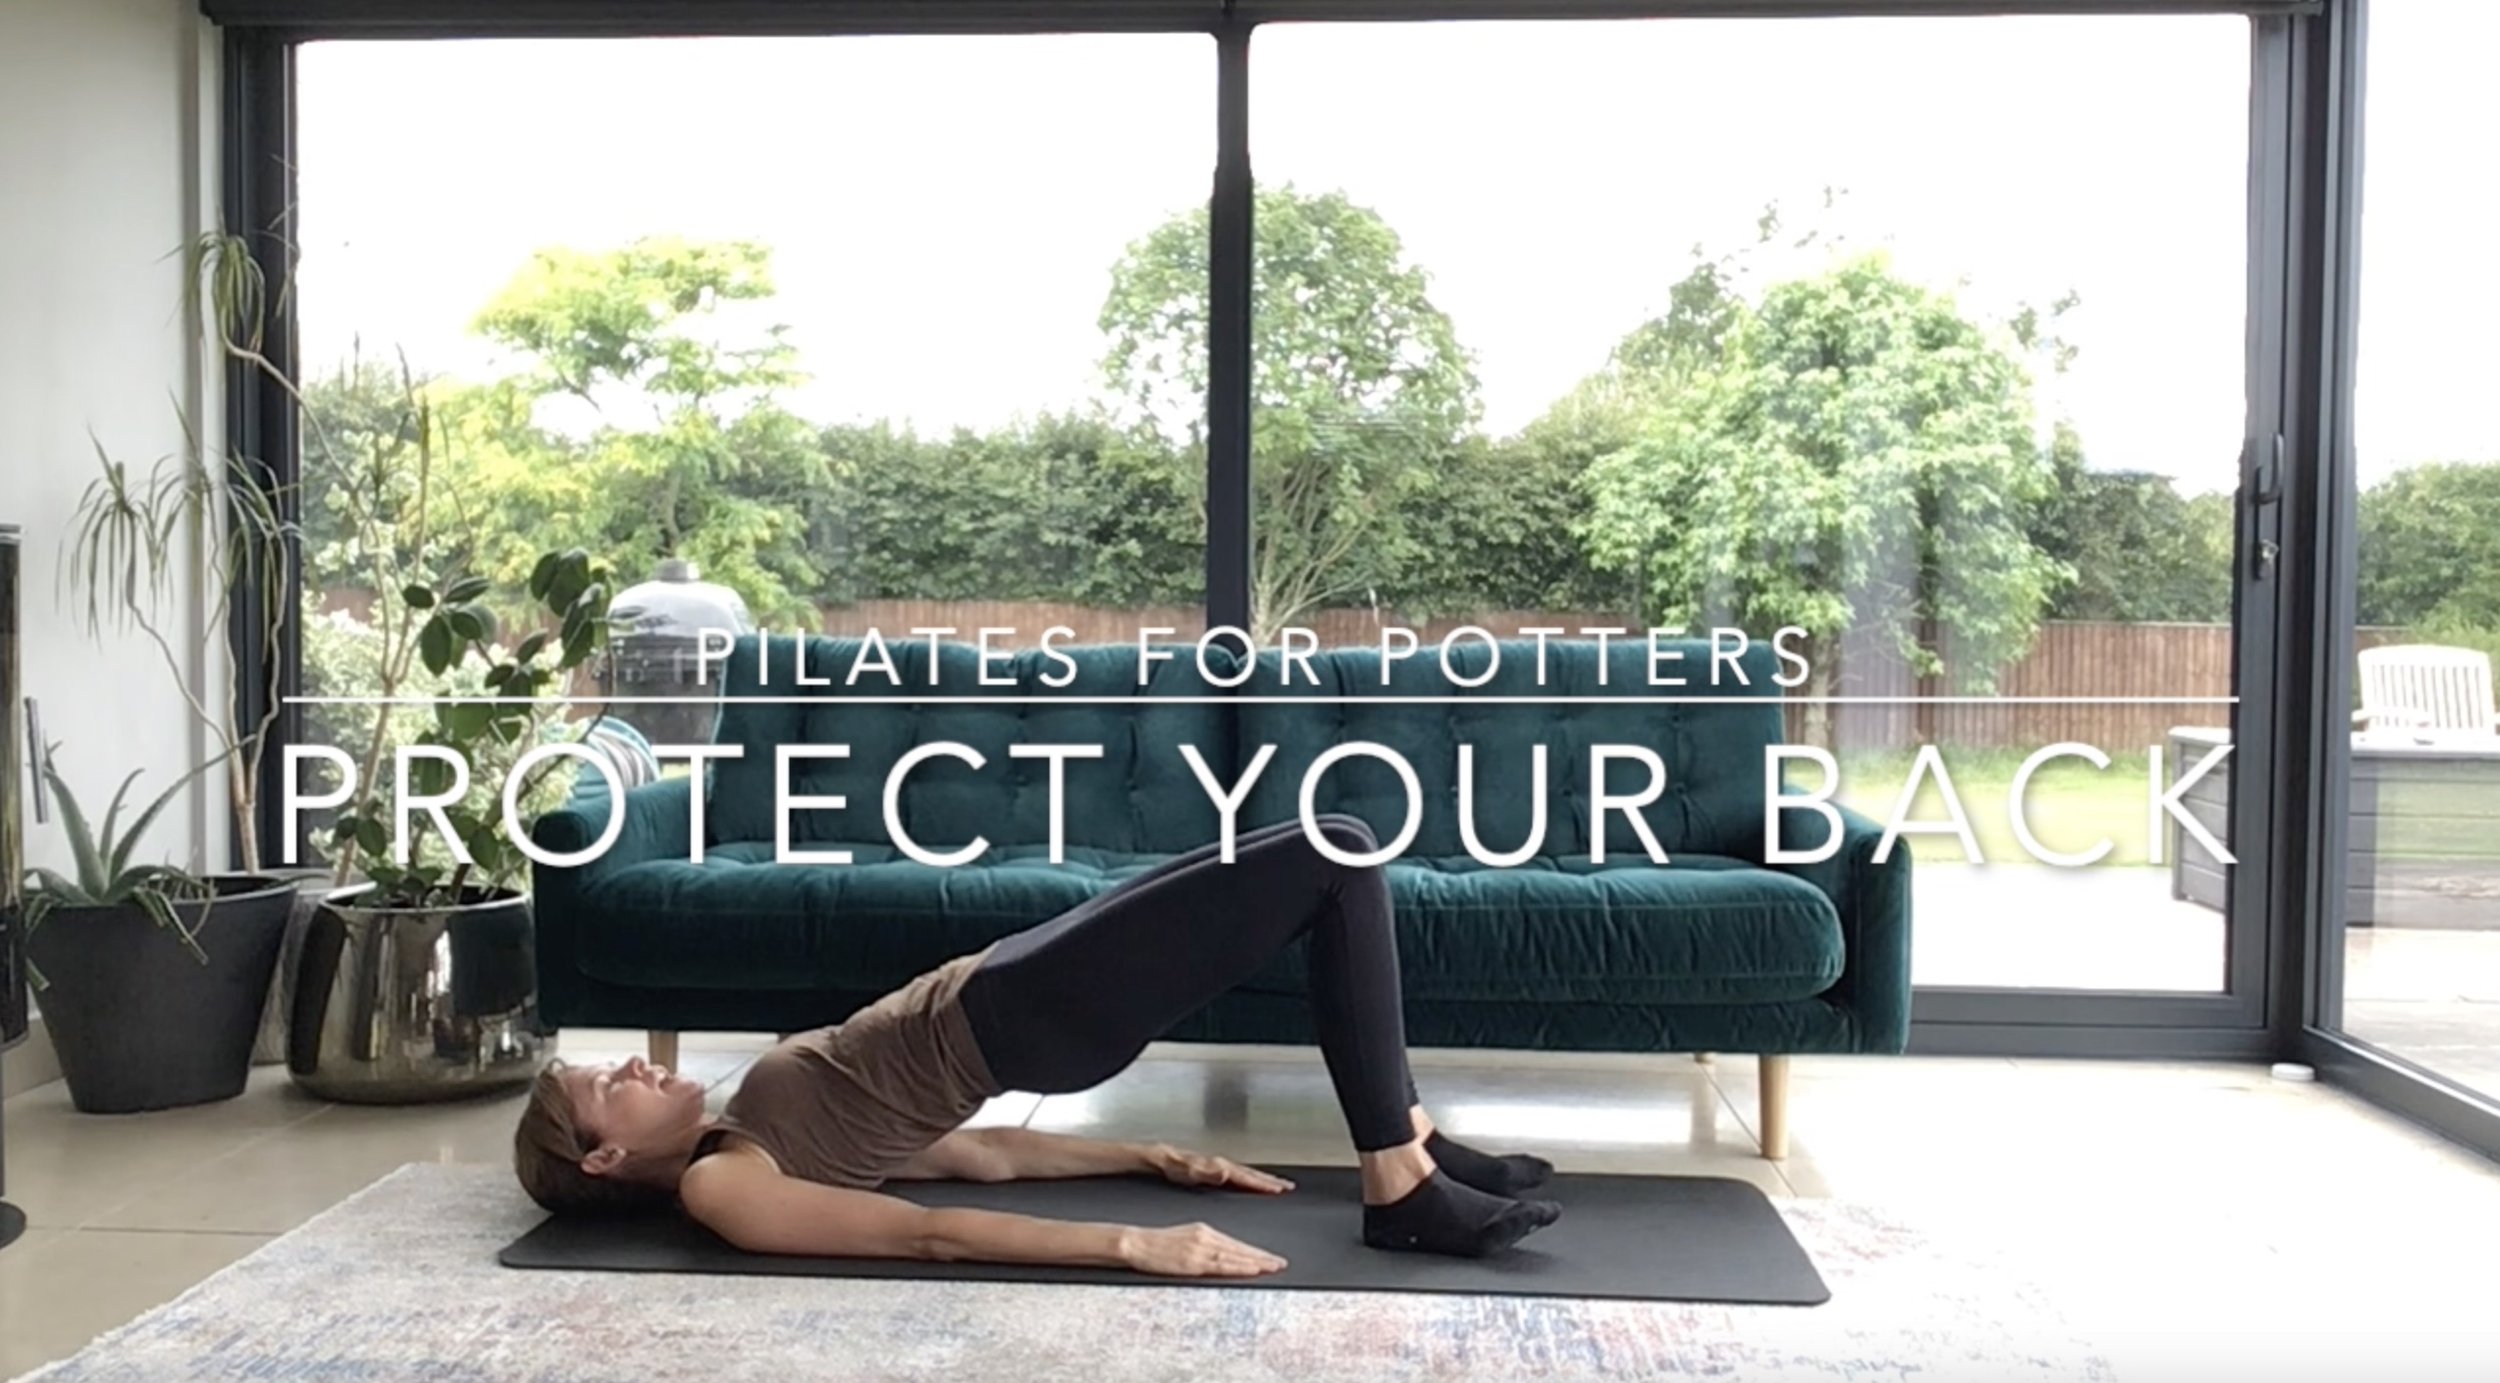 Pilates for Potters - Protect Your Back